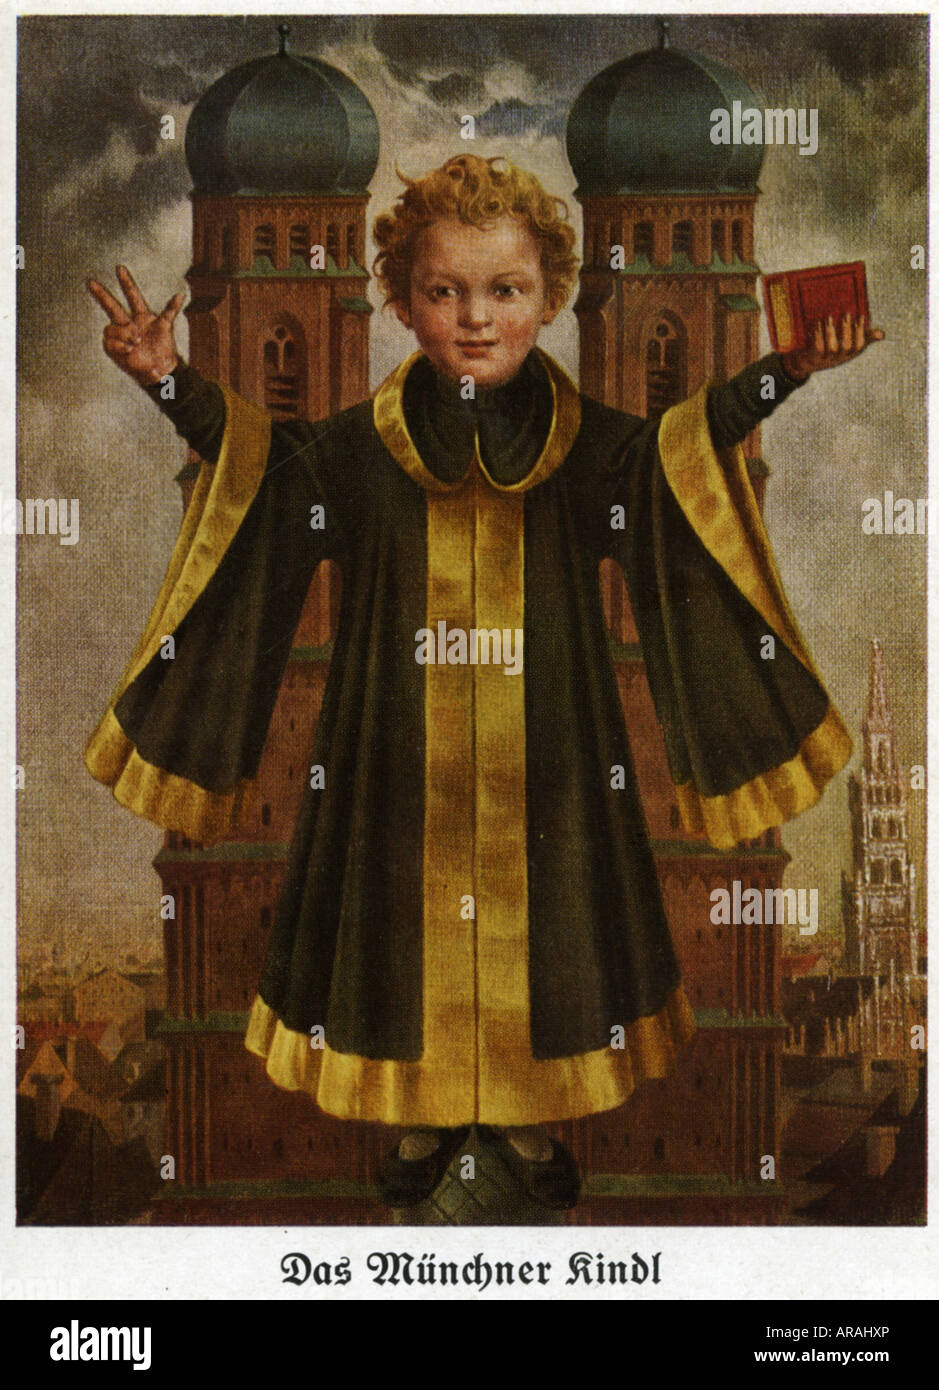 geography / travel, Germany, Munich, Münchner Kindl, art postcard after painting by Franz Xaver Wilfried Braunmiller (1905 - 1993), August Lengauer publisher,  towers, Cathedral, Munich Child, symbol, Bavaria, Europe, 20th century, historic, historical, 1990s, Stock Photo